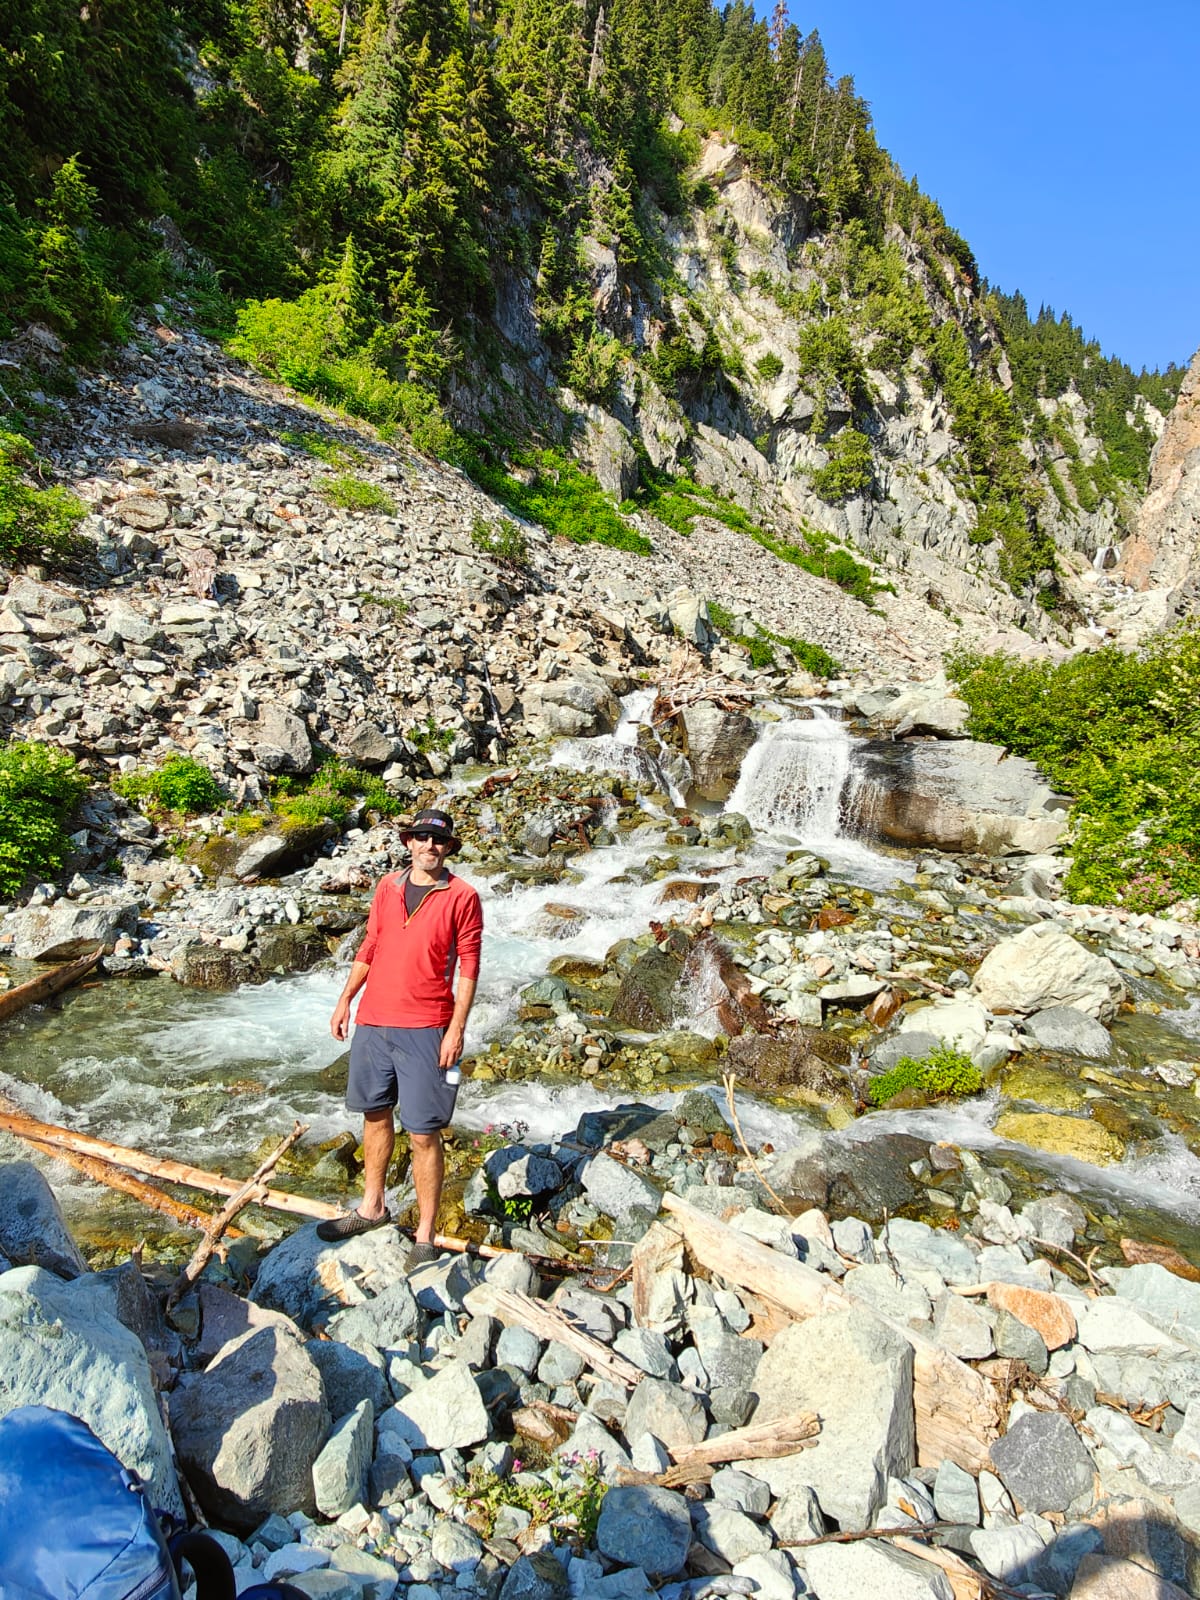 mark next to a stream deep in the PCT